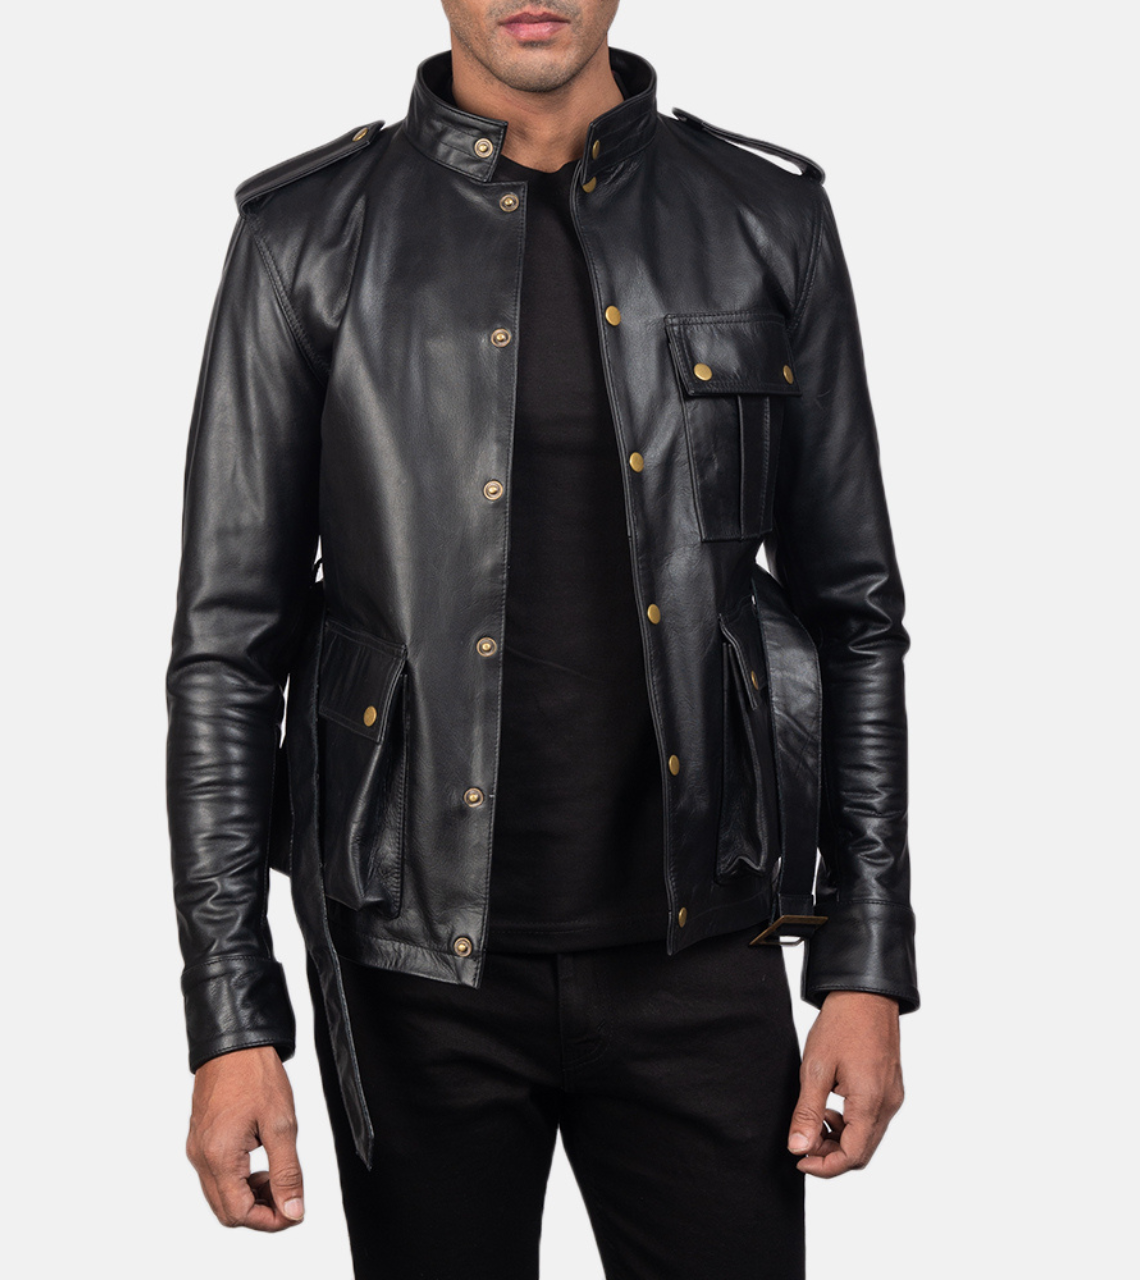 Hauspuff Black Leather Jacket For Men's